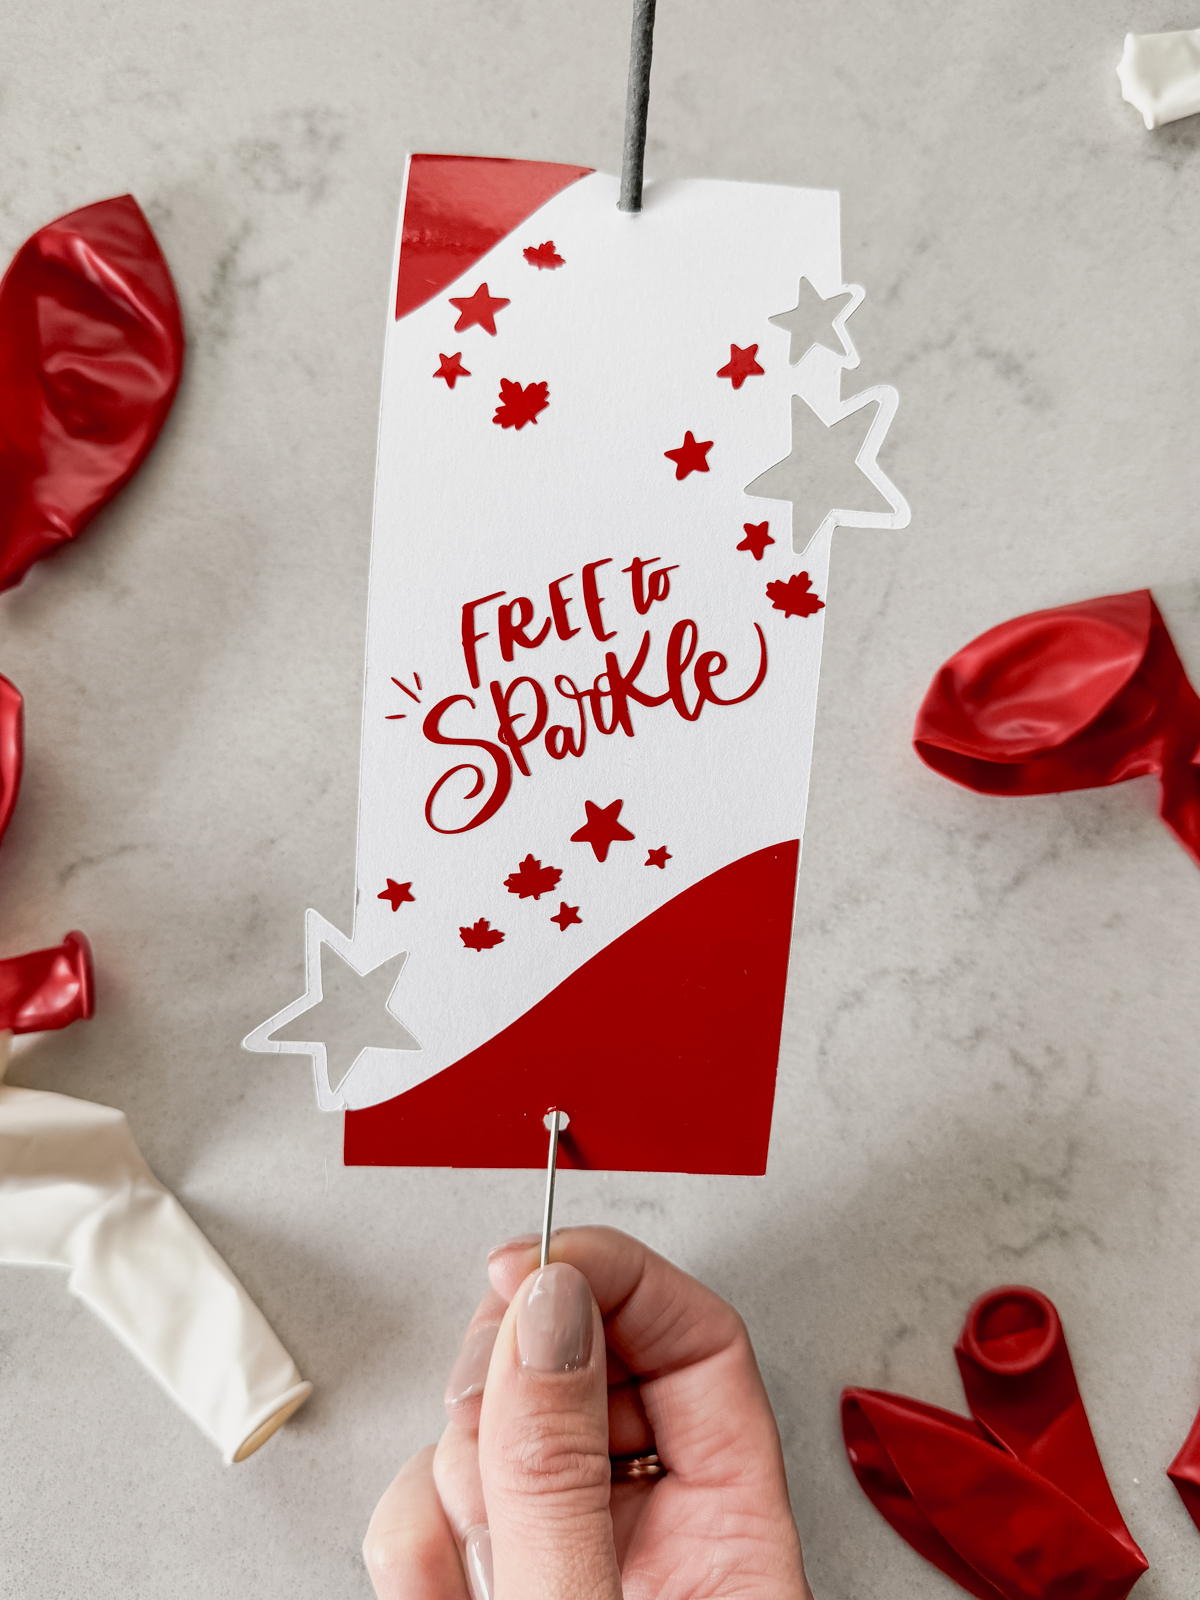 image of sparkler holder made with cricut- design has stars and maple leaves and the hand lettering 'free to sparkle' sparkler holder shown held over marble countertop with red and white balloons